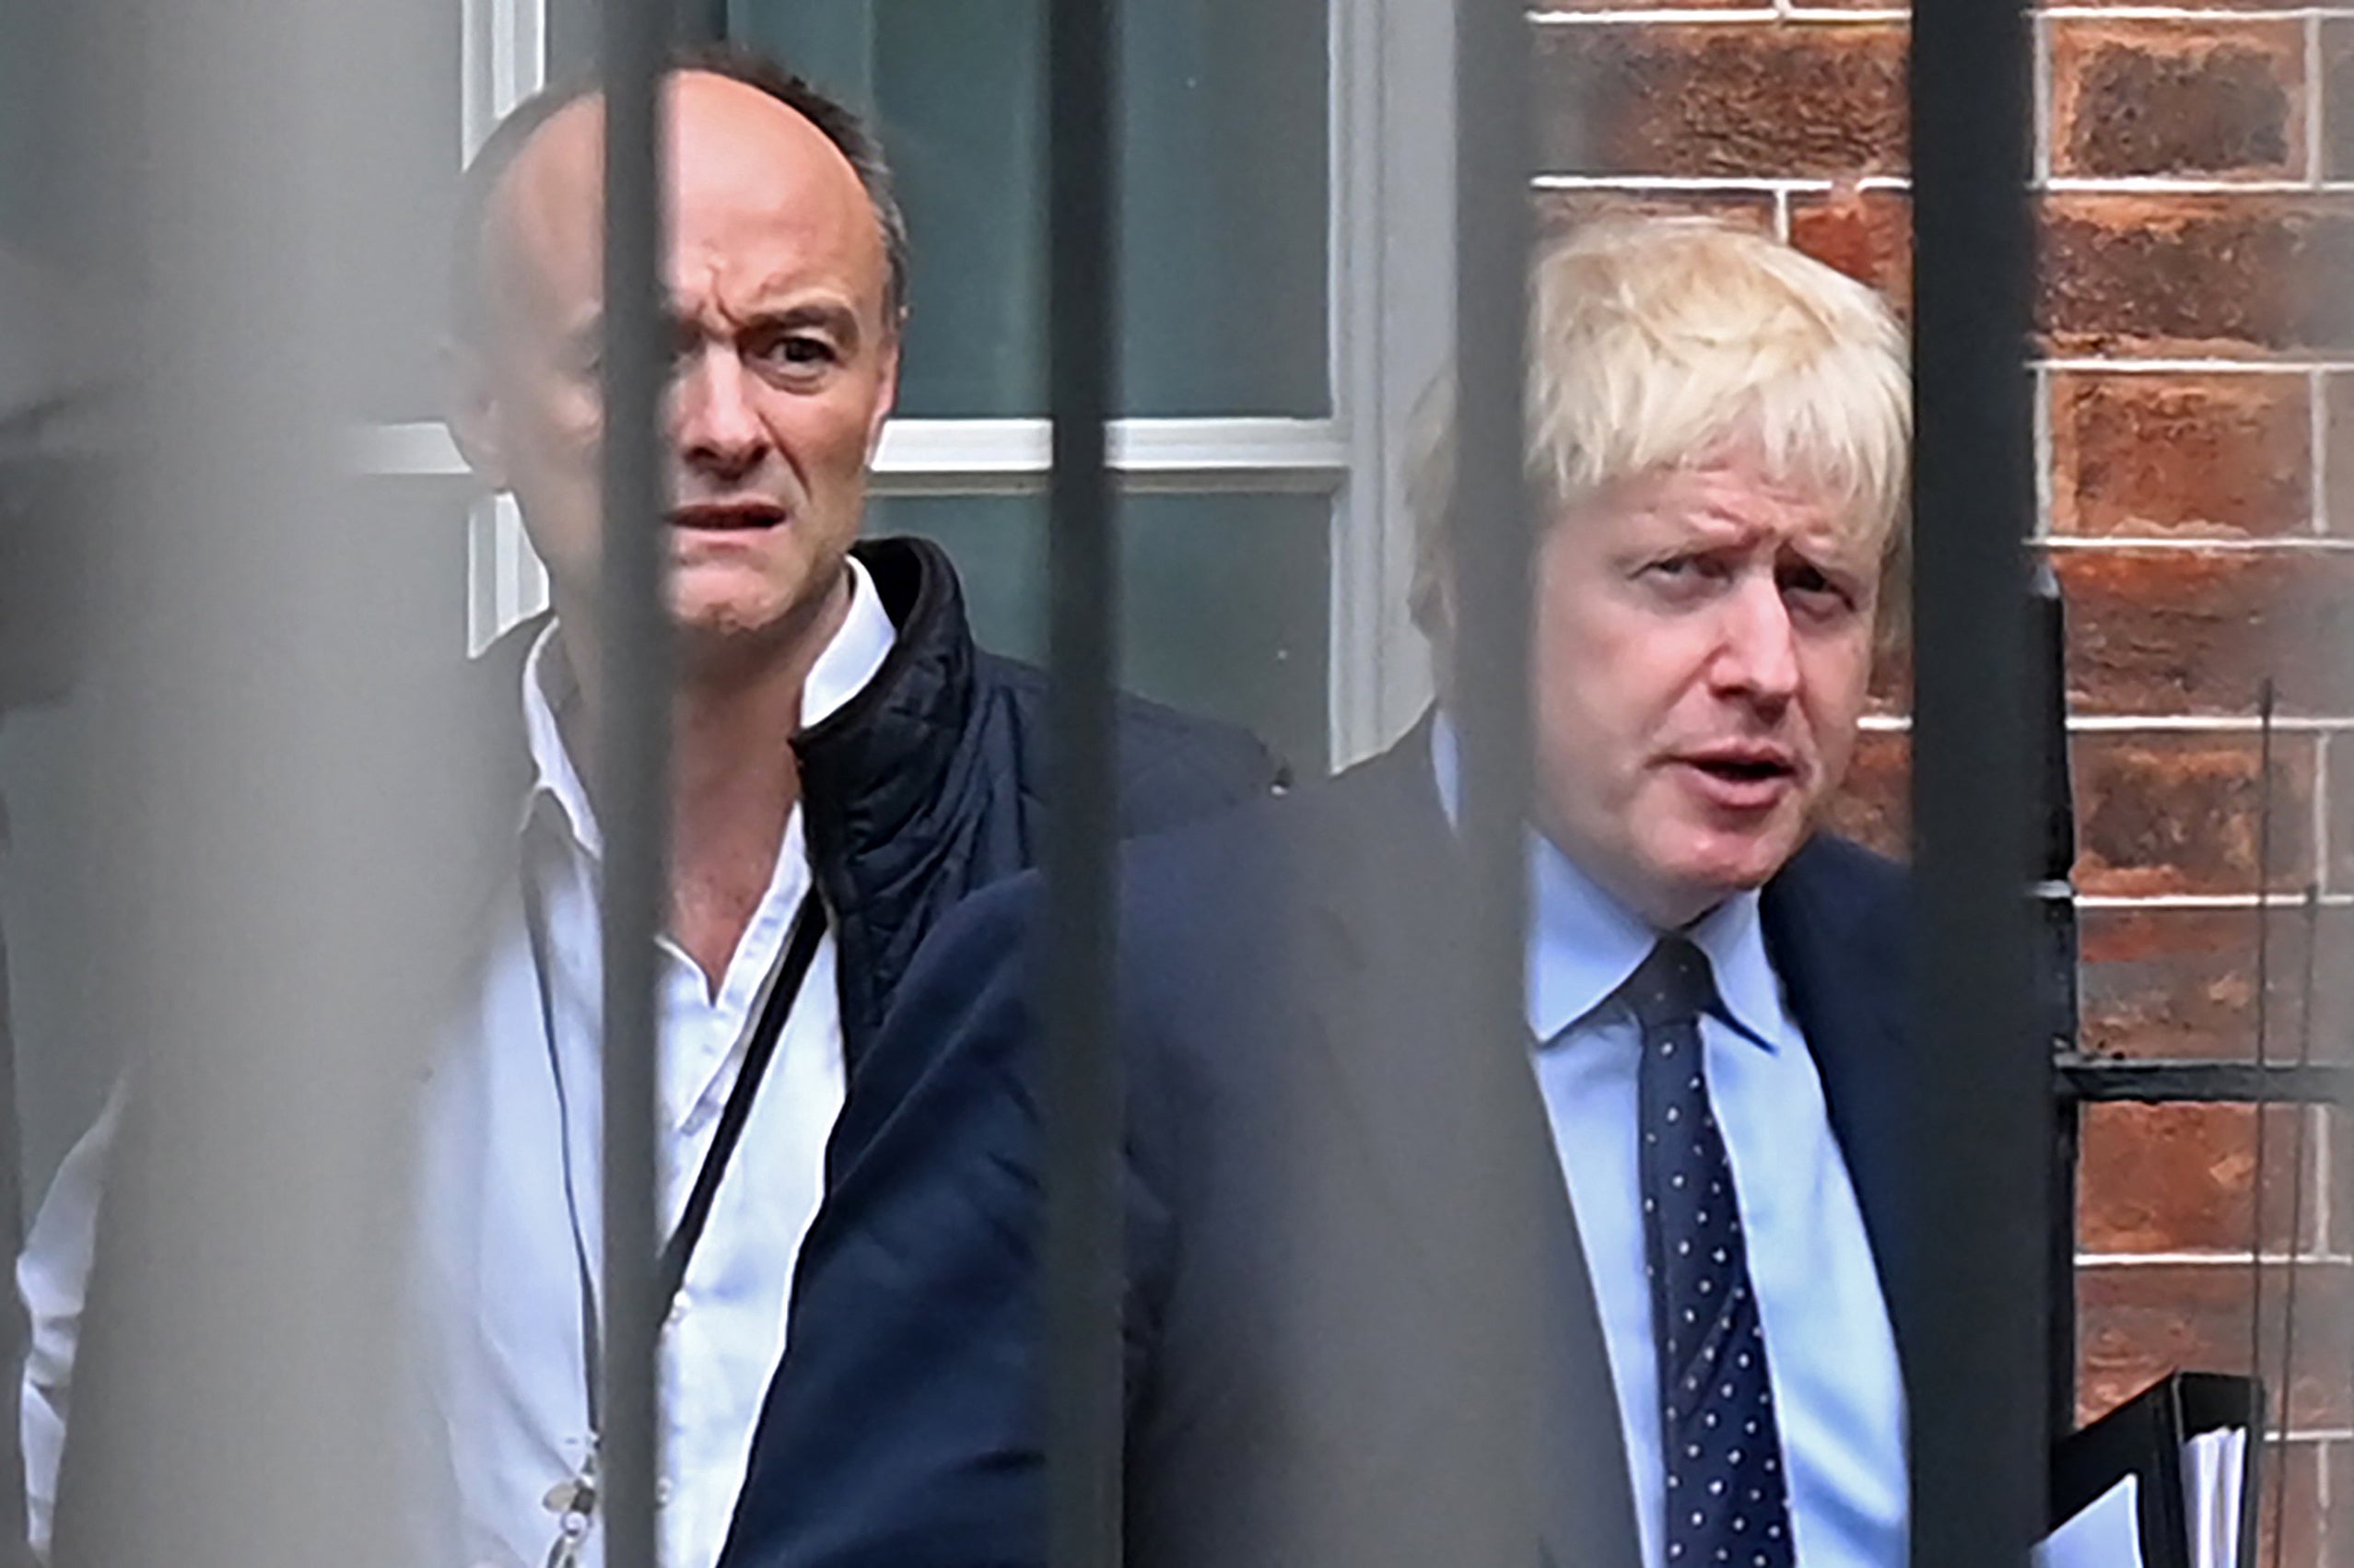 Dominic Cummings and Boris Johnson leave Downing Steet for the House of Parliament on 3 September 2019